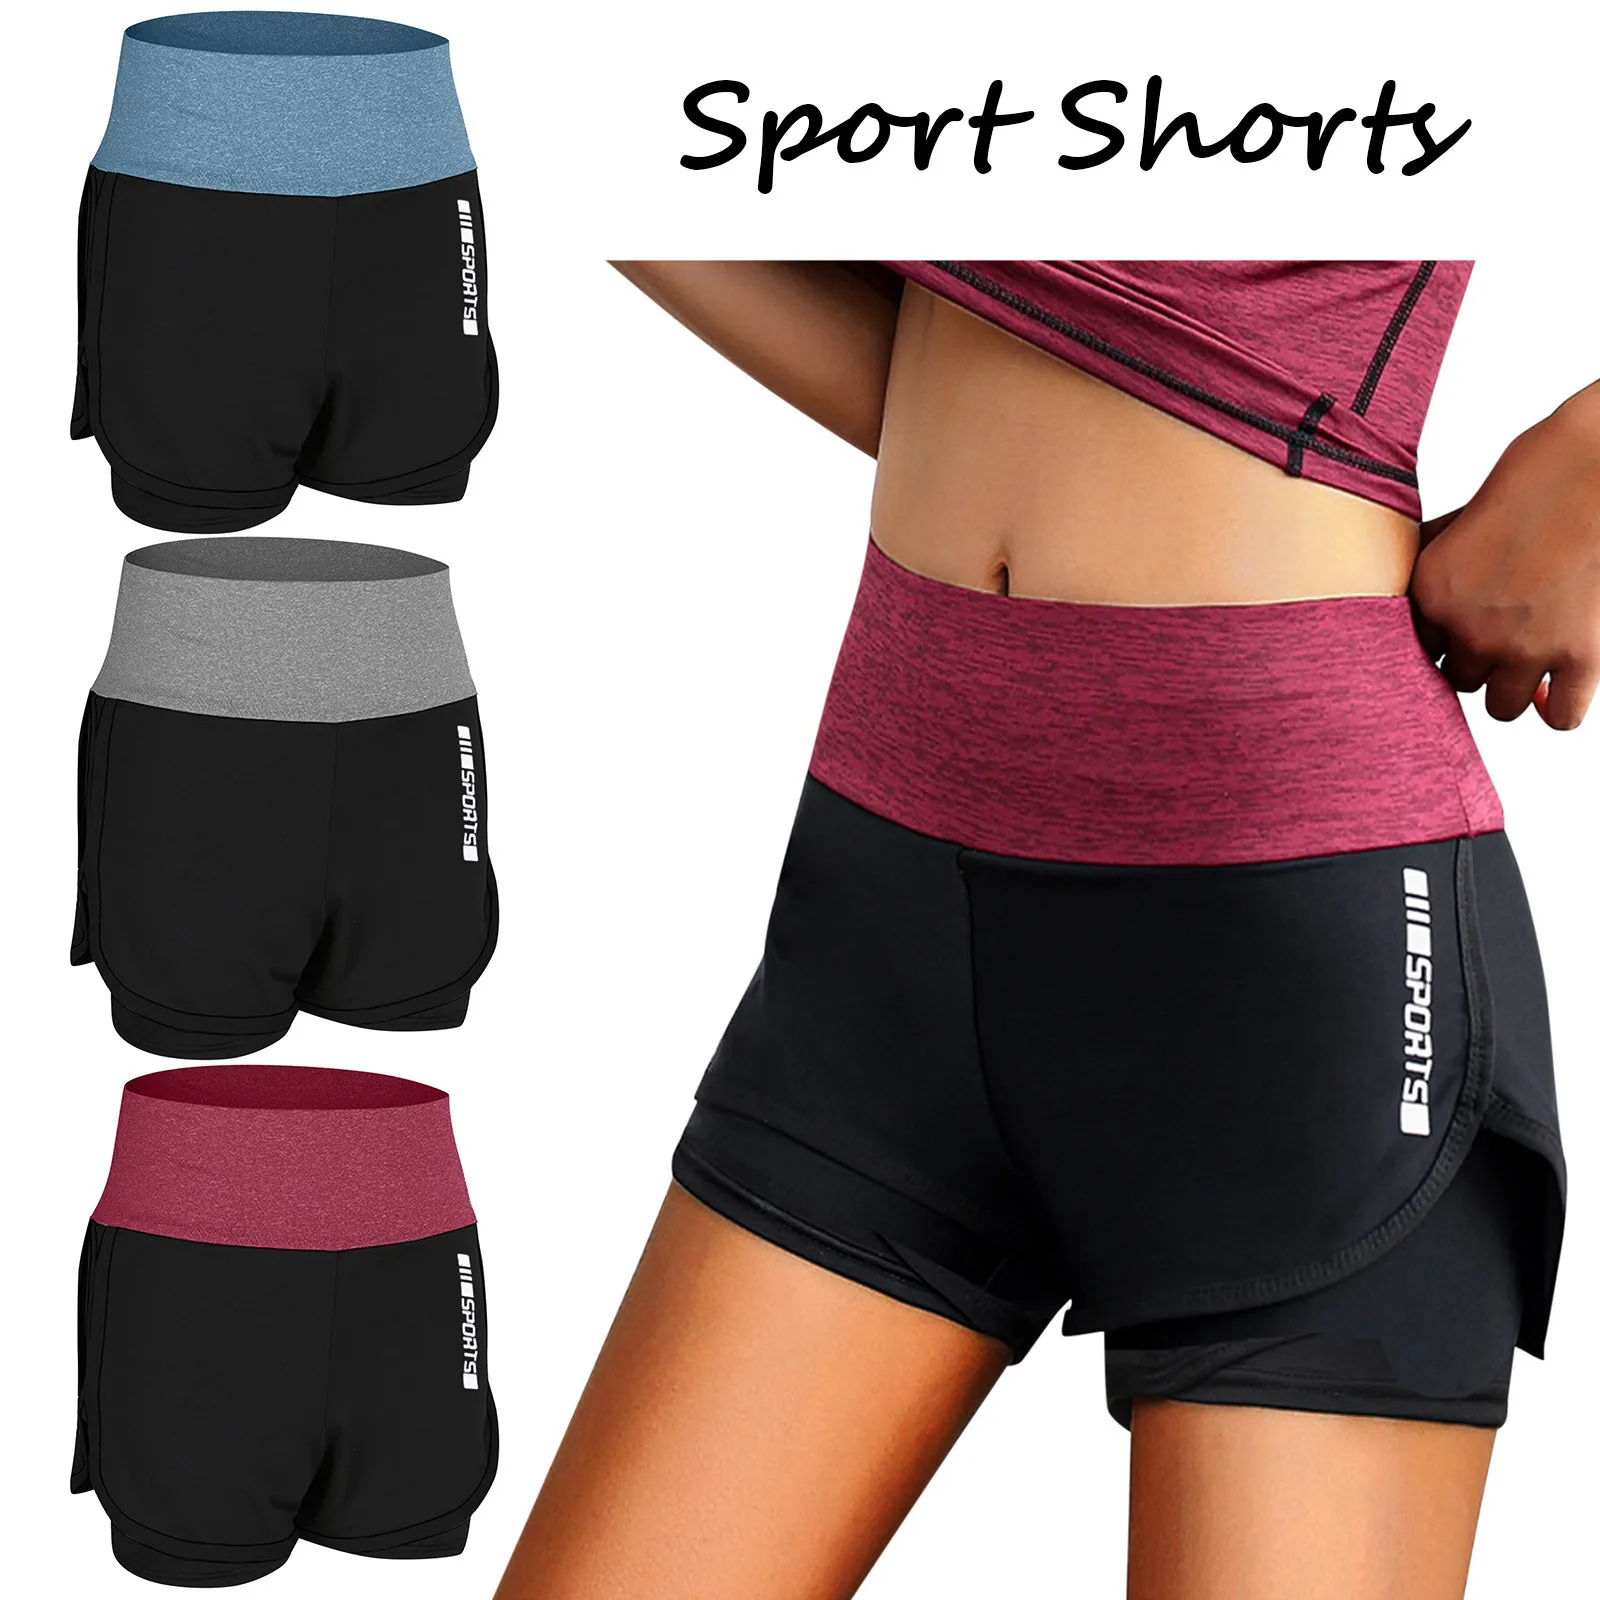 Women Casual Stretch Strethcy Patchwork Sport Short Pants Clothes Breathable Running Sportswear Fitness Clothing Dropshipping leather shorts